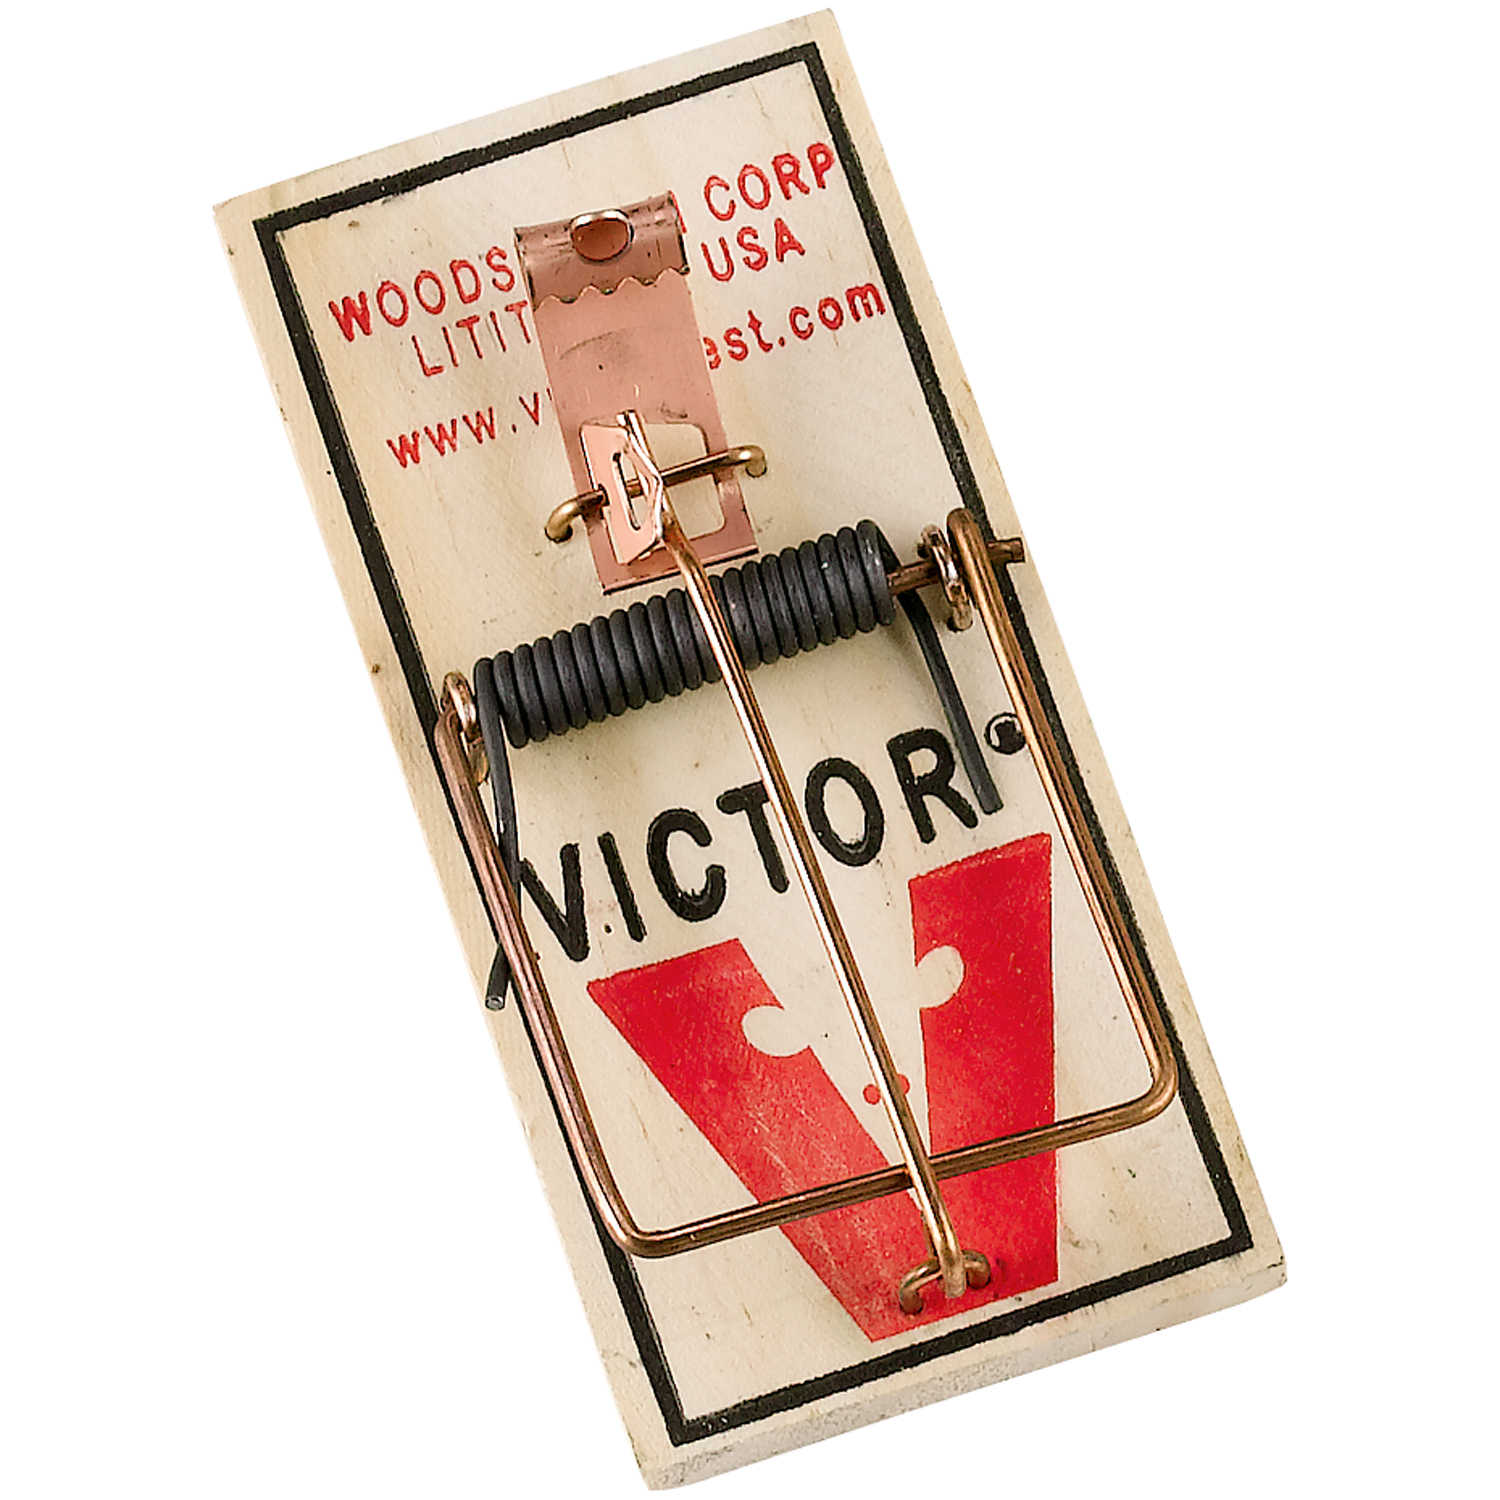 Victor Mouse Trap